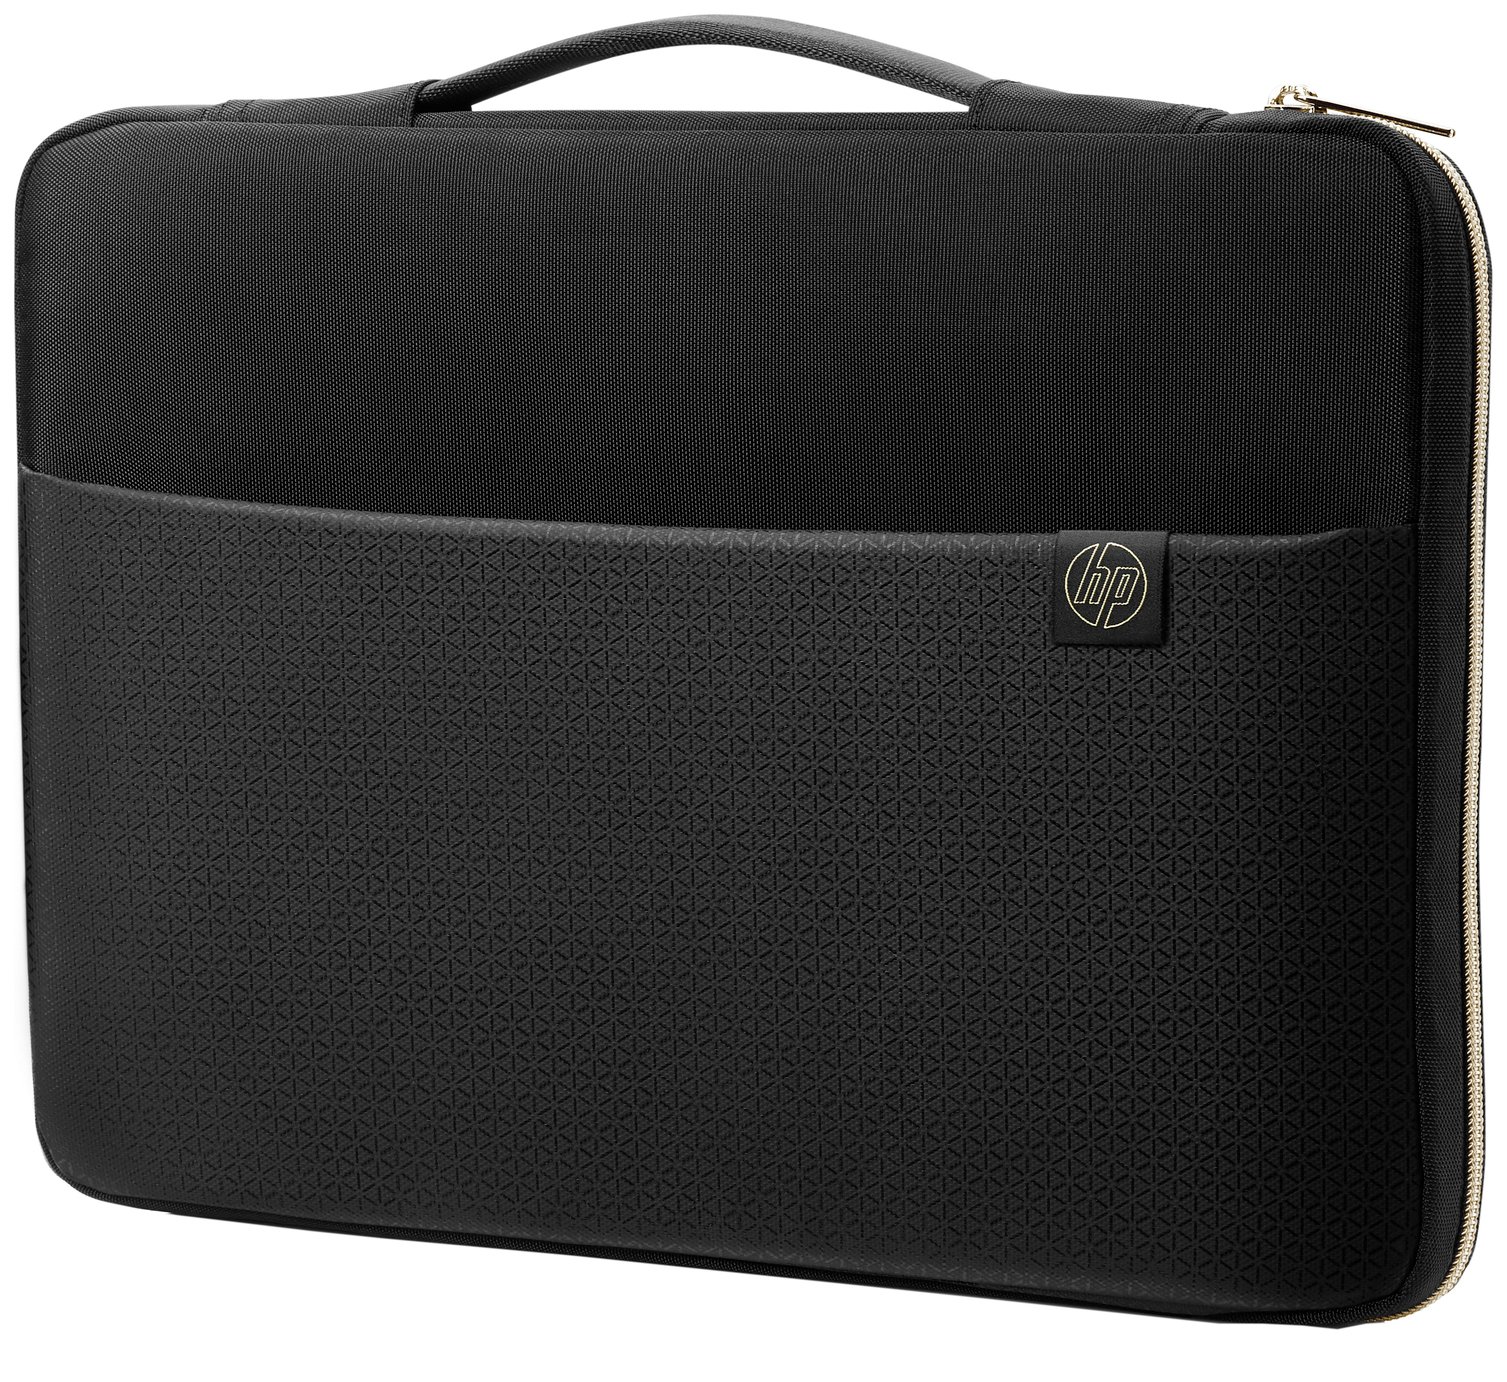 HP 15.6 Inch Laptop Sleeve - Black and Gold